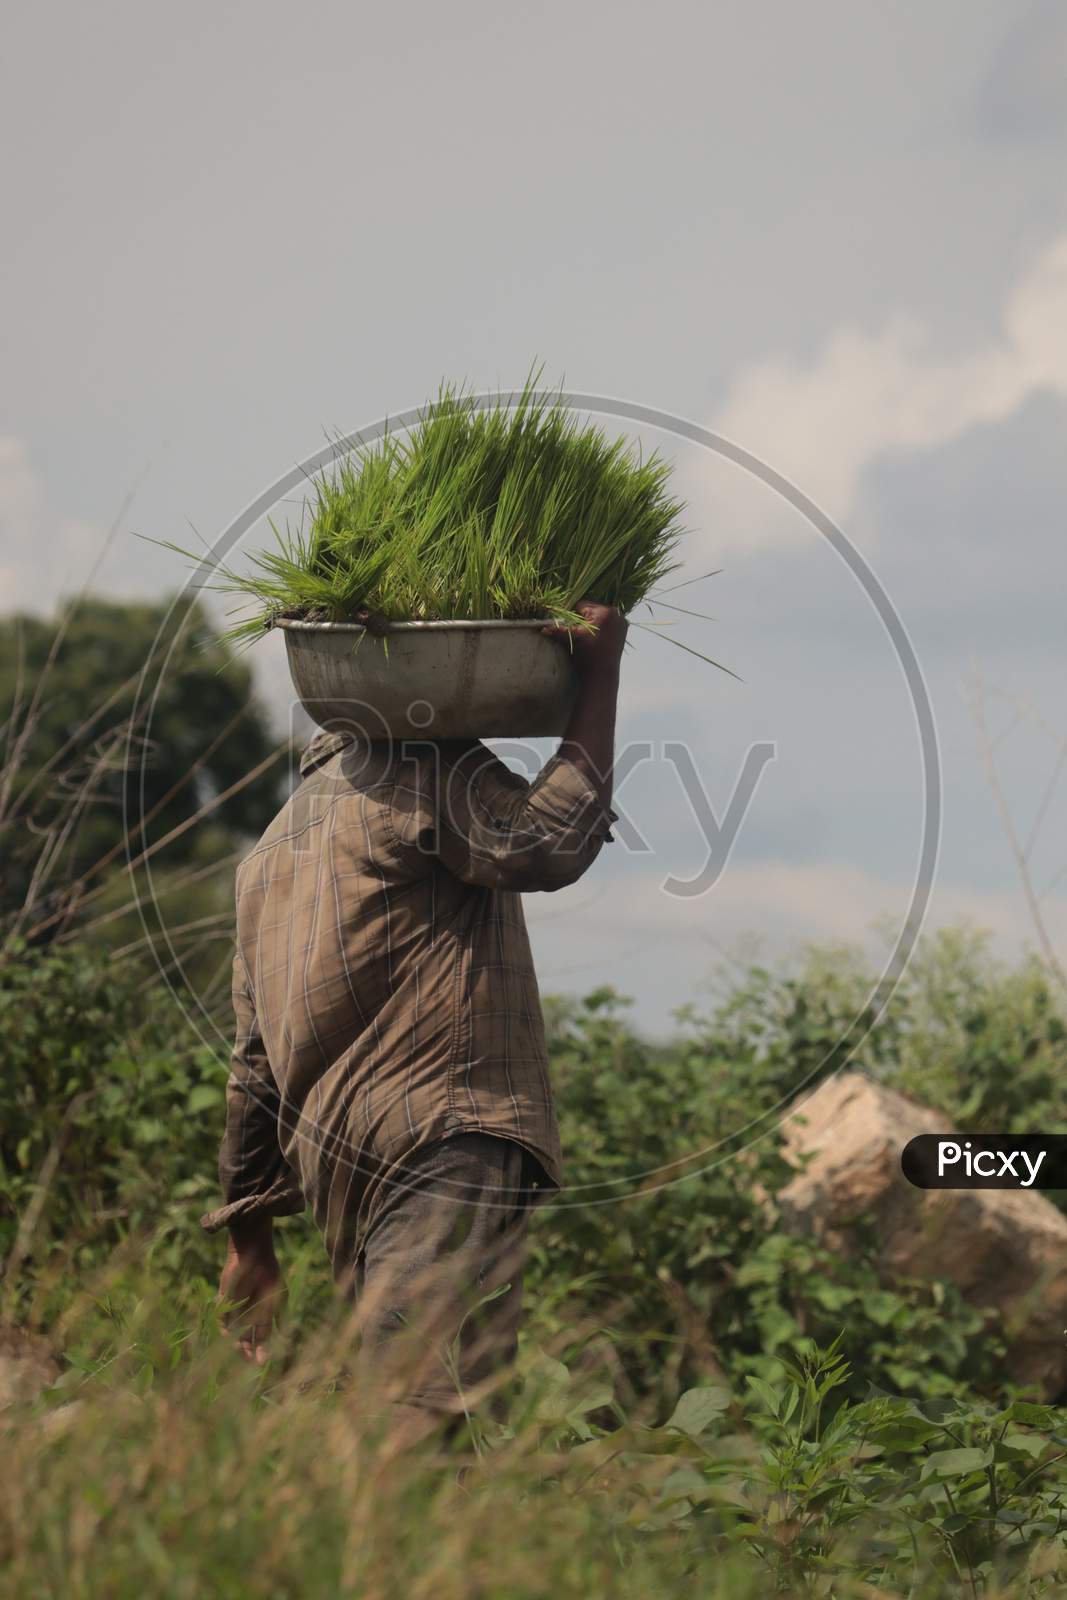 A man carrying paddy